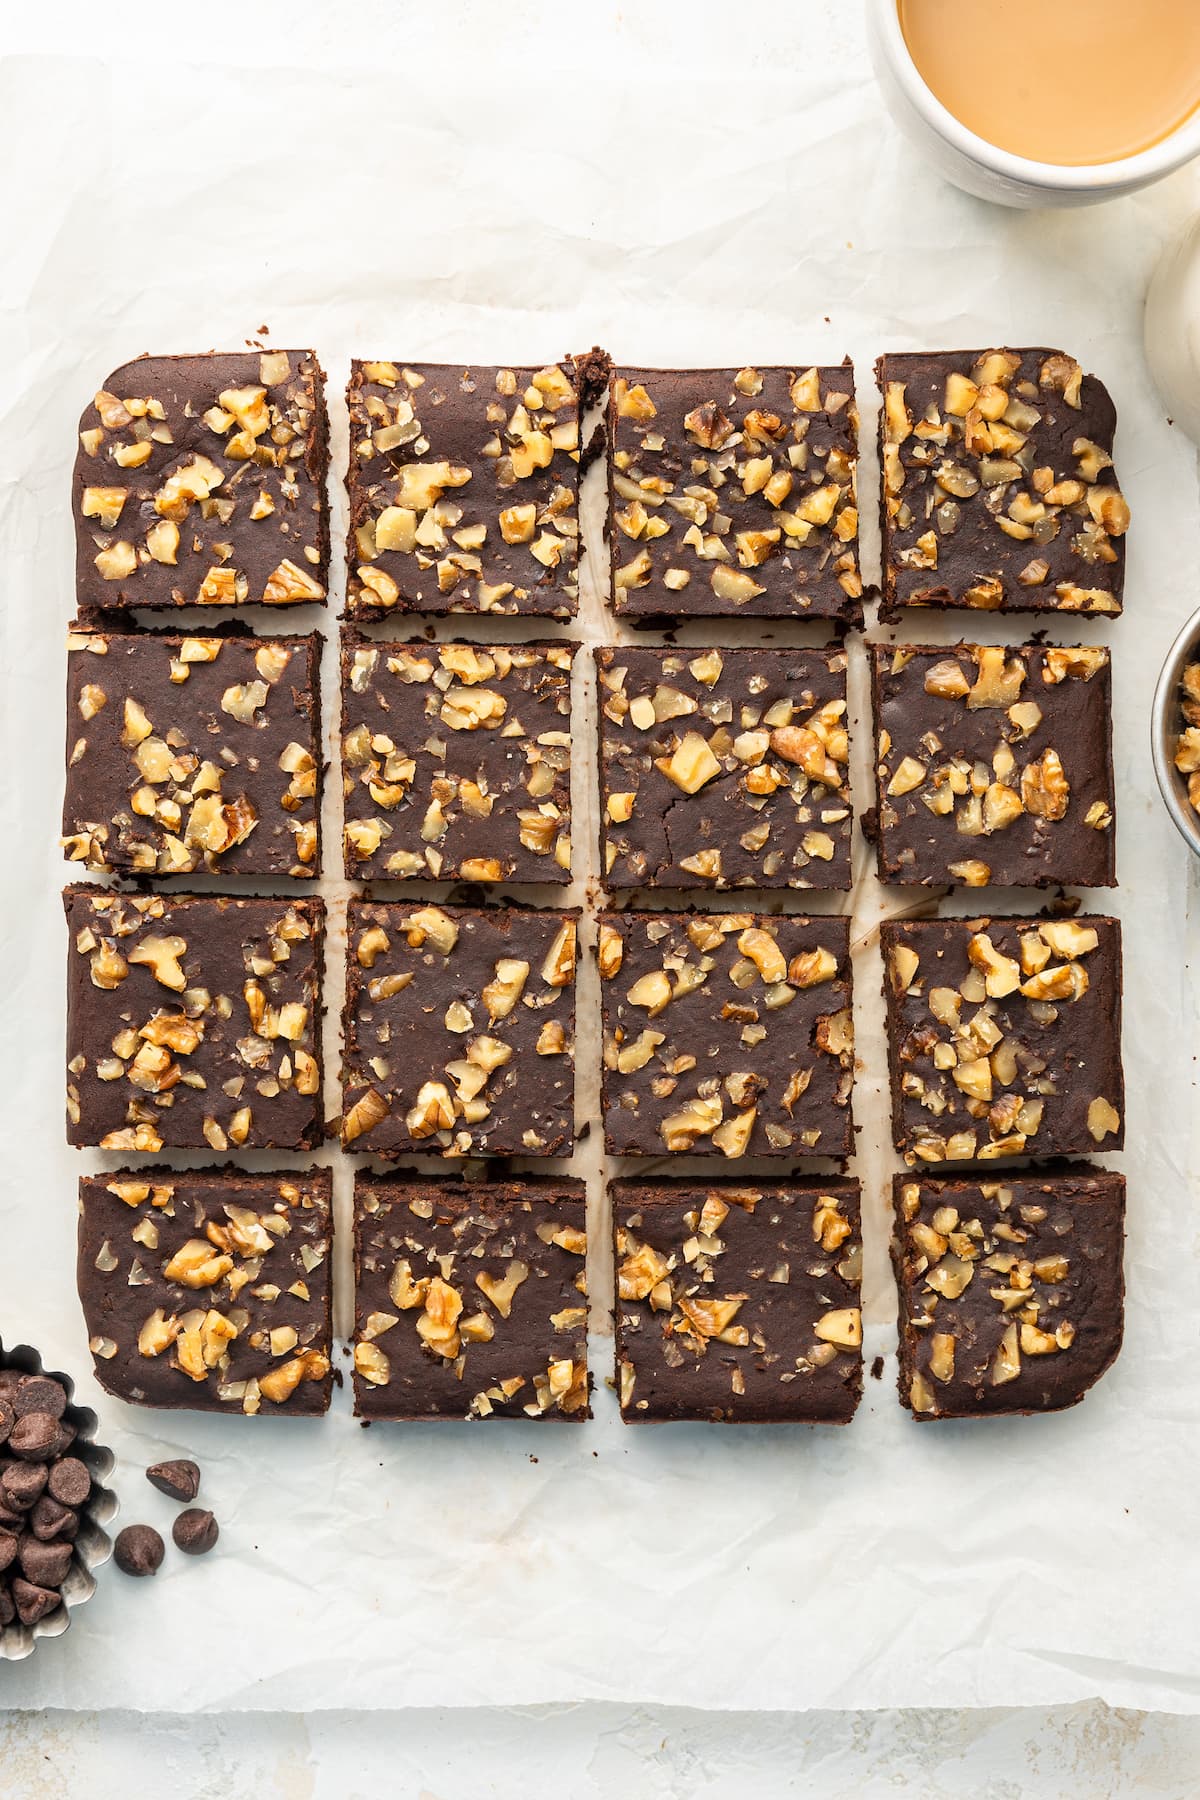 Cut the black bean brownies into even squares.